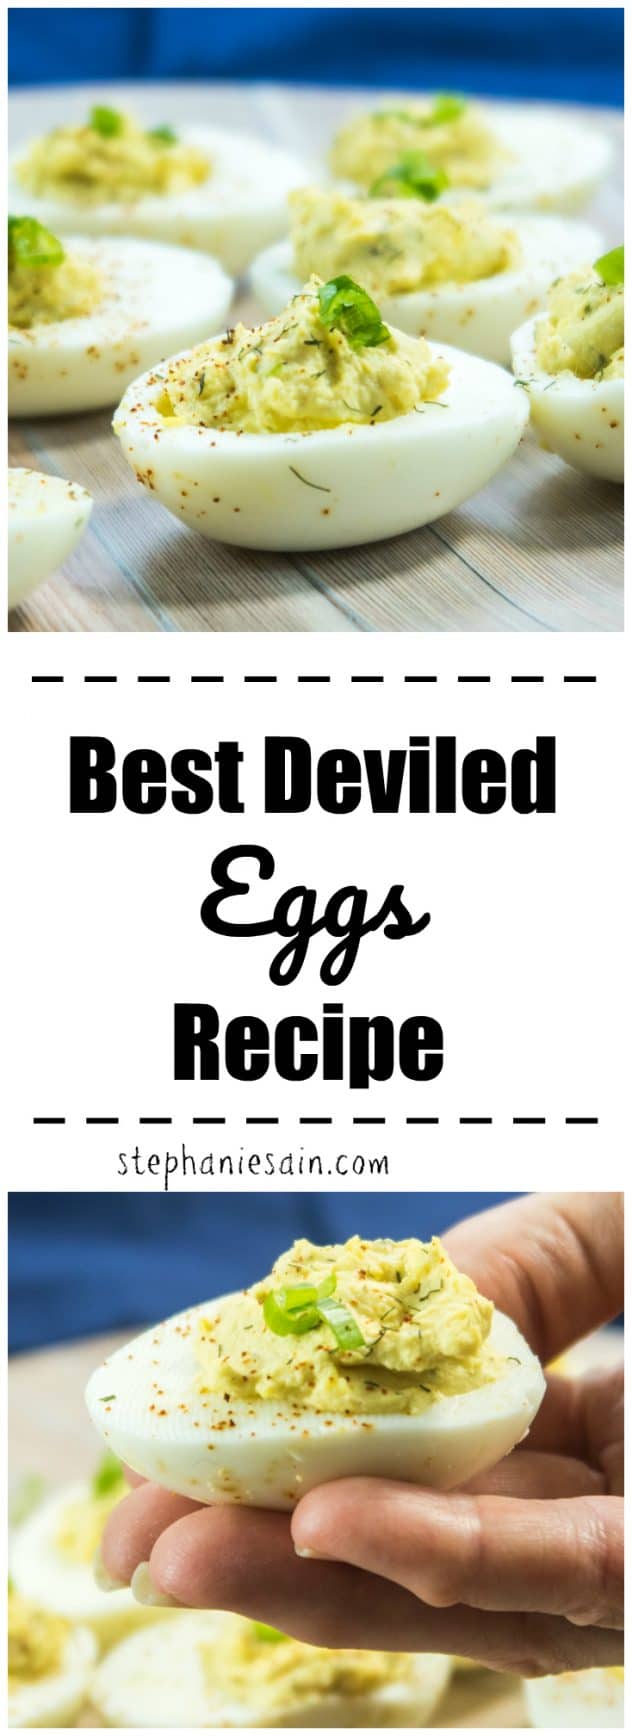 This Best Deviled Eggs Recipe is super Easy to make and will soon become you go-to for deviled eggs. Perfect for family gatherings, holidays and cookouts. Gluten Free & Vegetarian.